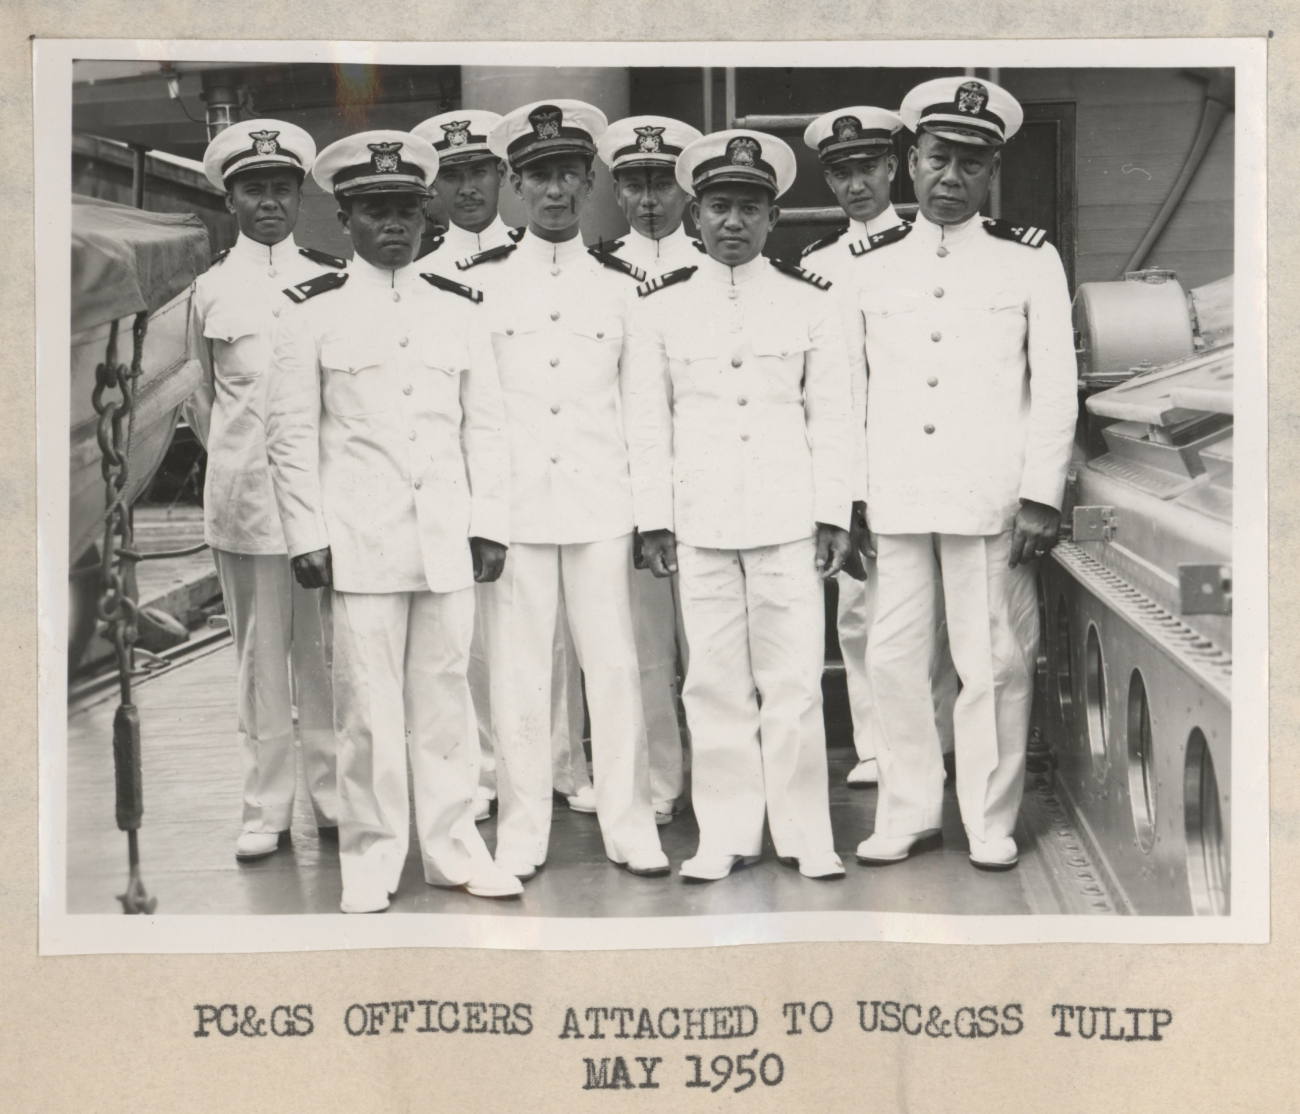 Philippine Coast and Geodetic Survey officers attached to the USC&GS; ship TULIP